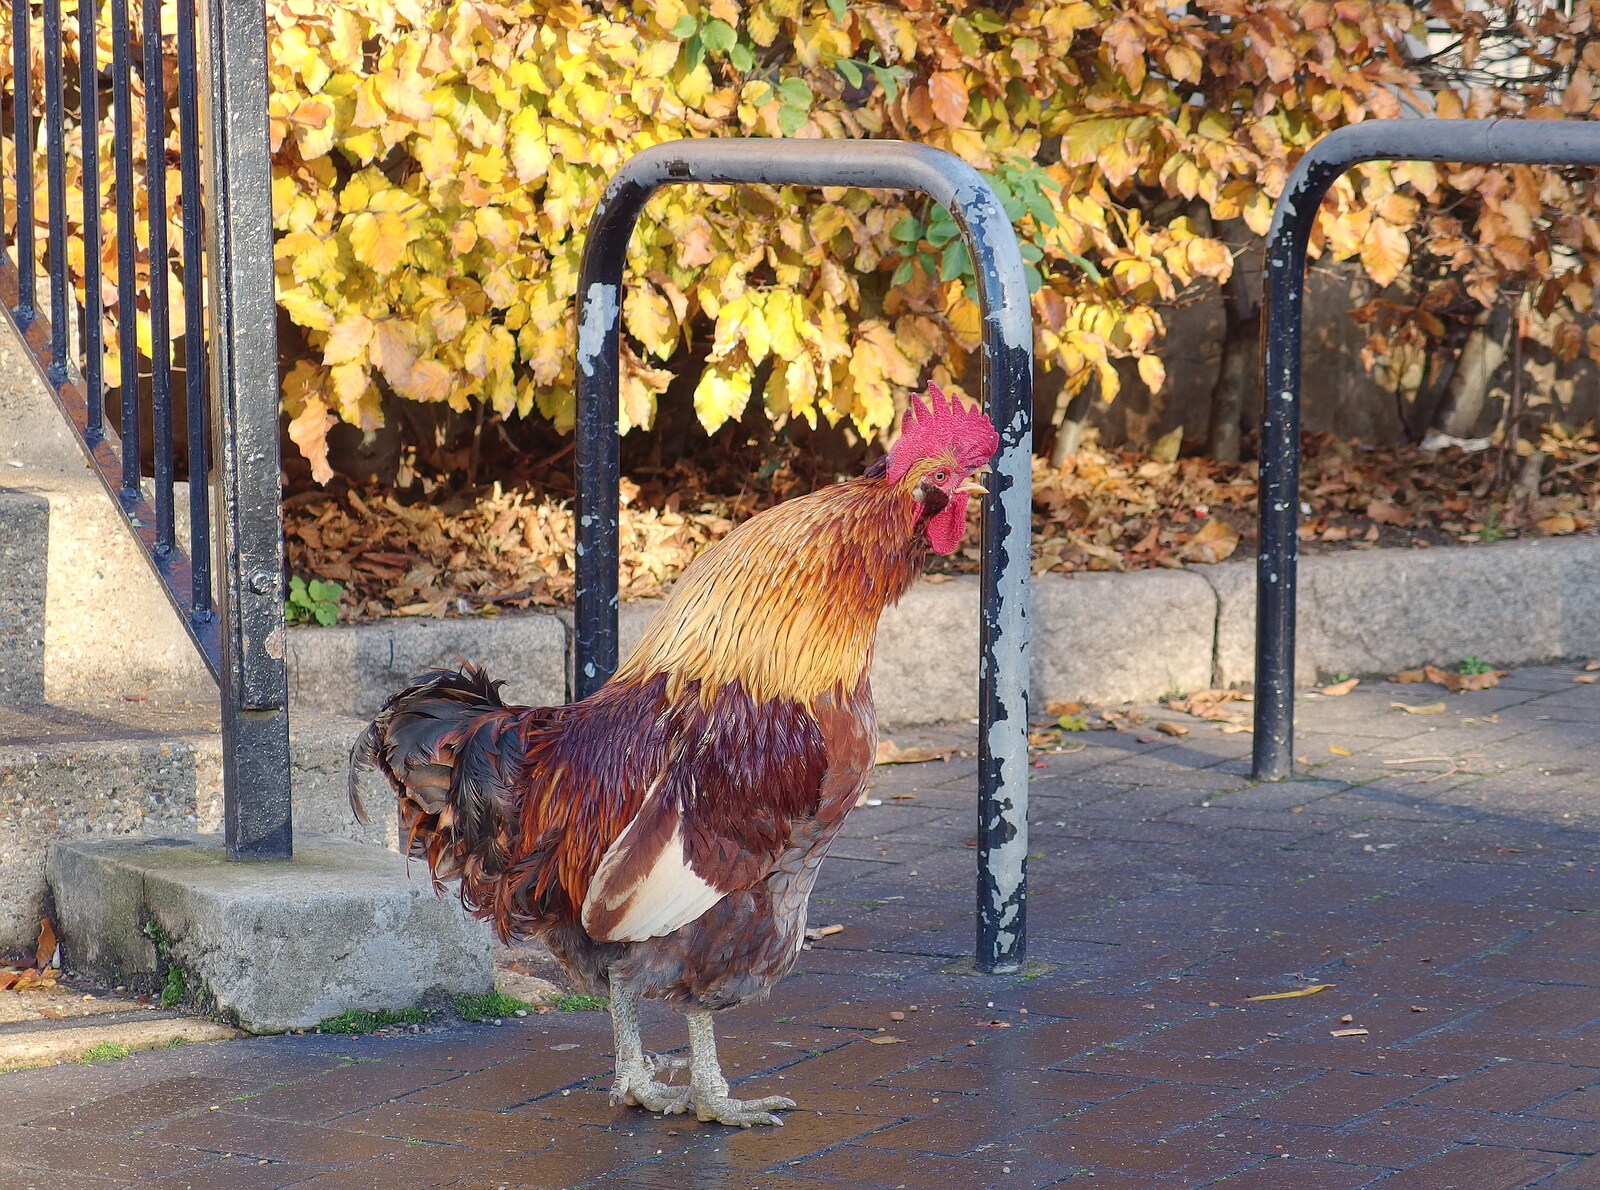 More Building and Palgrave Playground, Suffolk - 24th November 2013: A cockerel struts about